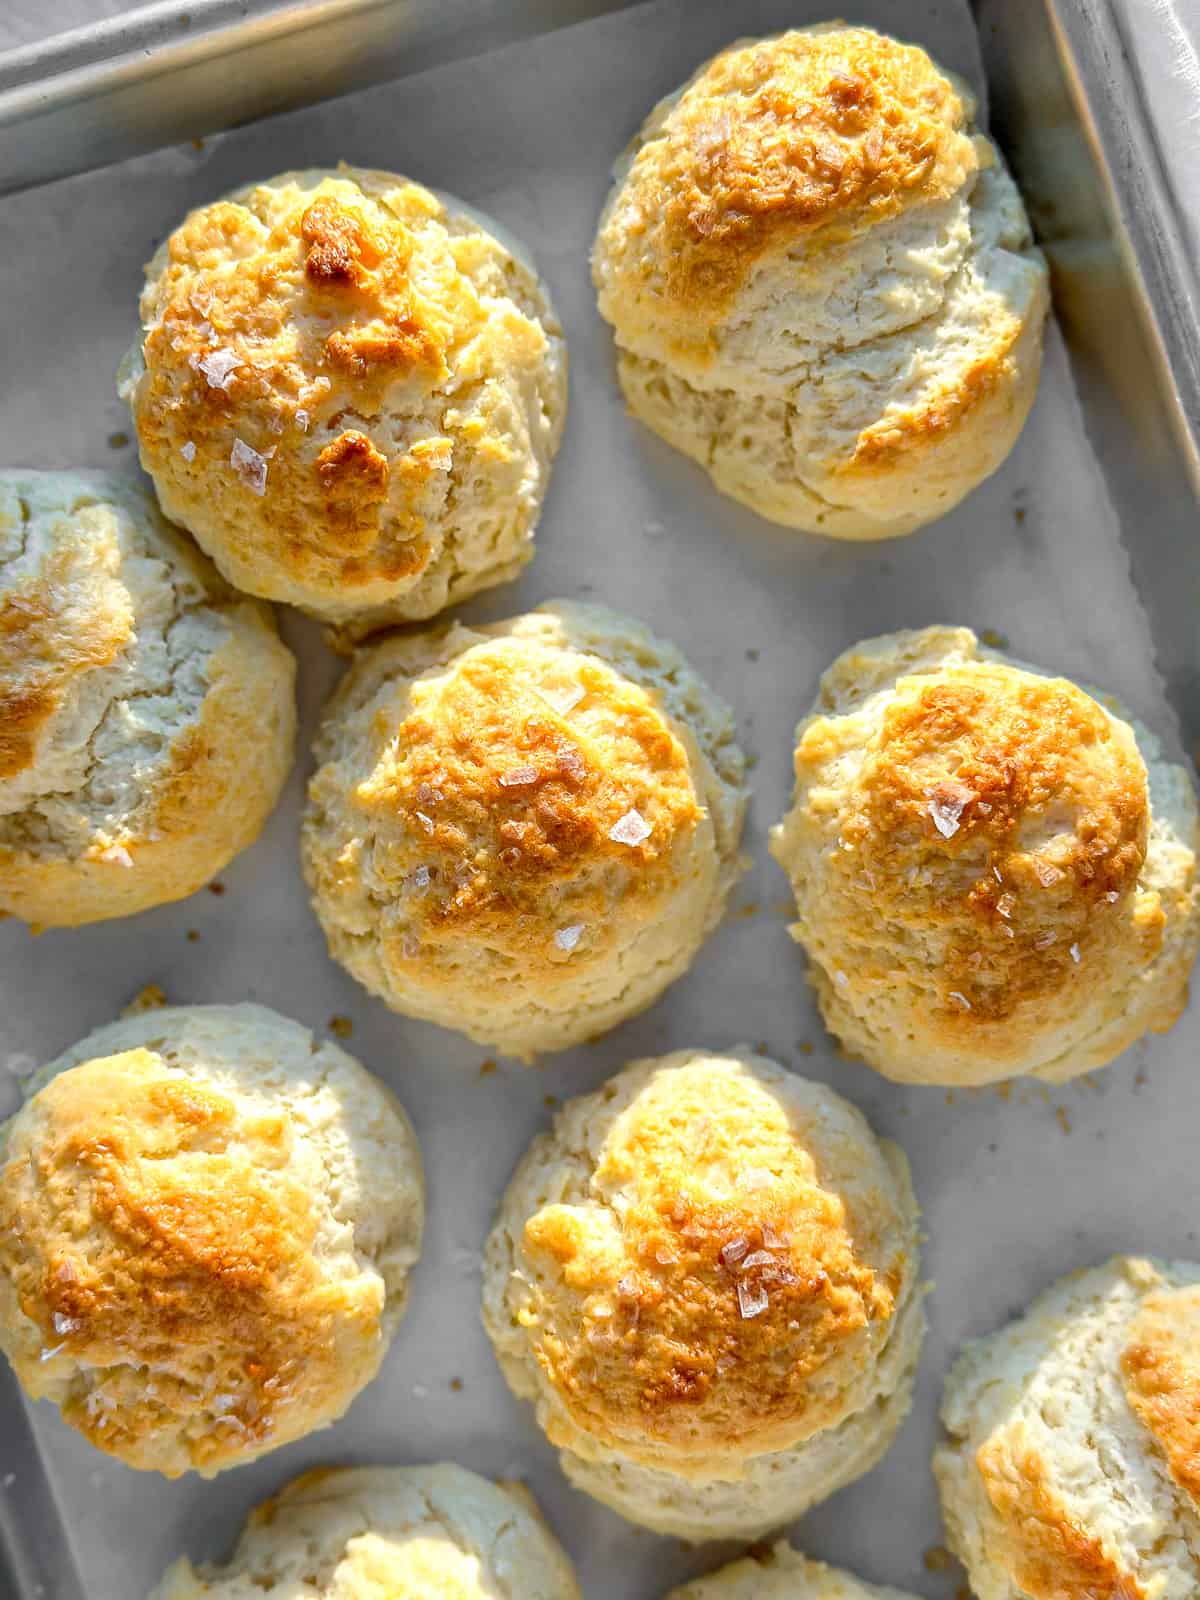 Baked drop biscuits made with self rising flour and heavy cream.